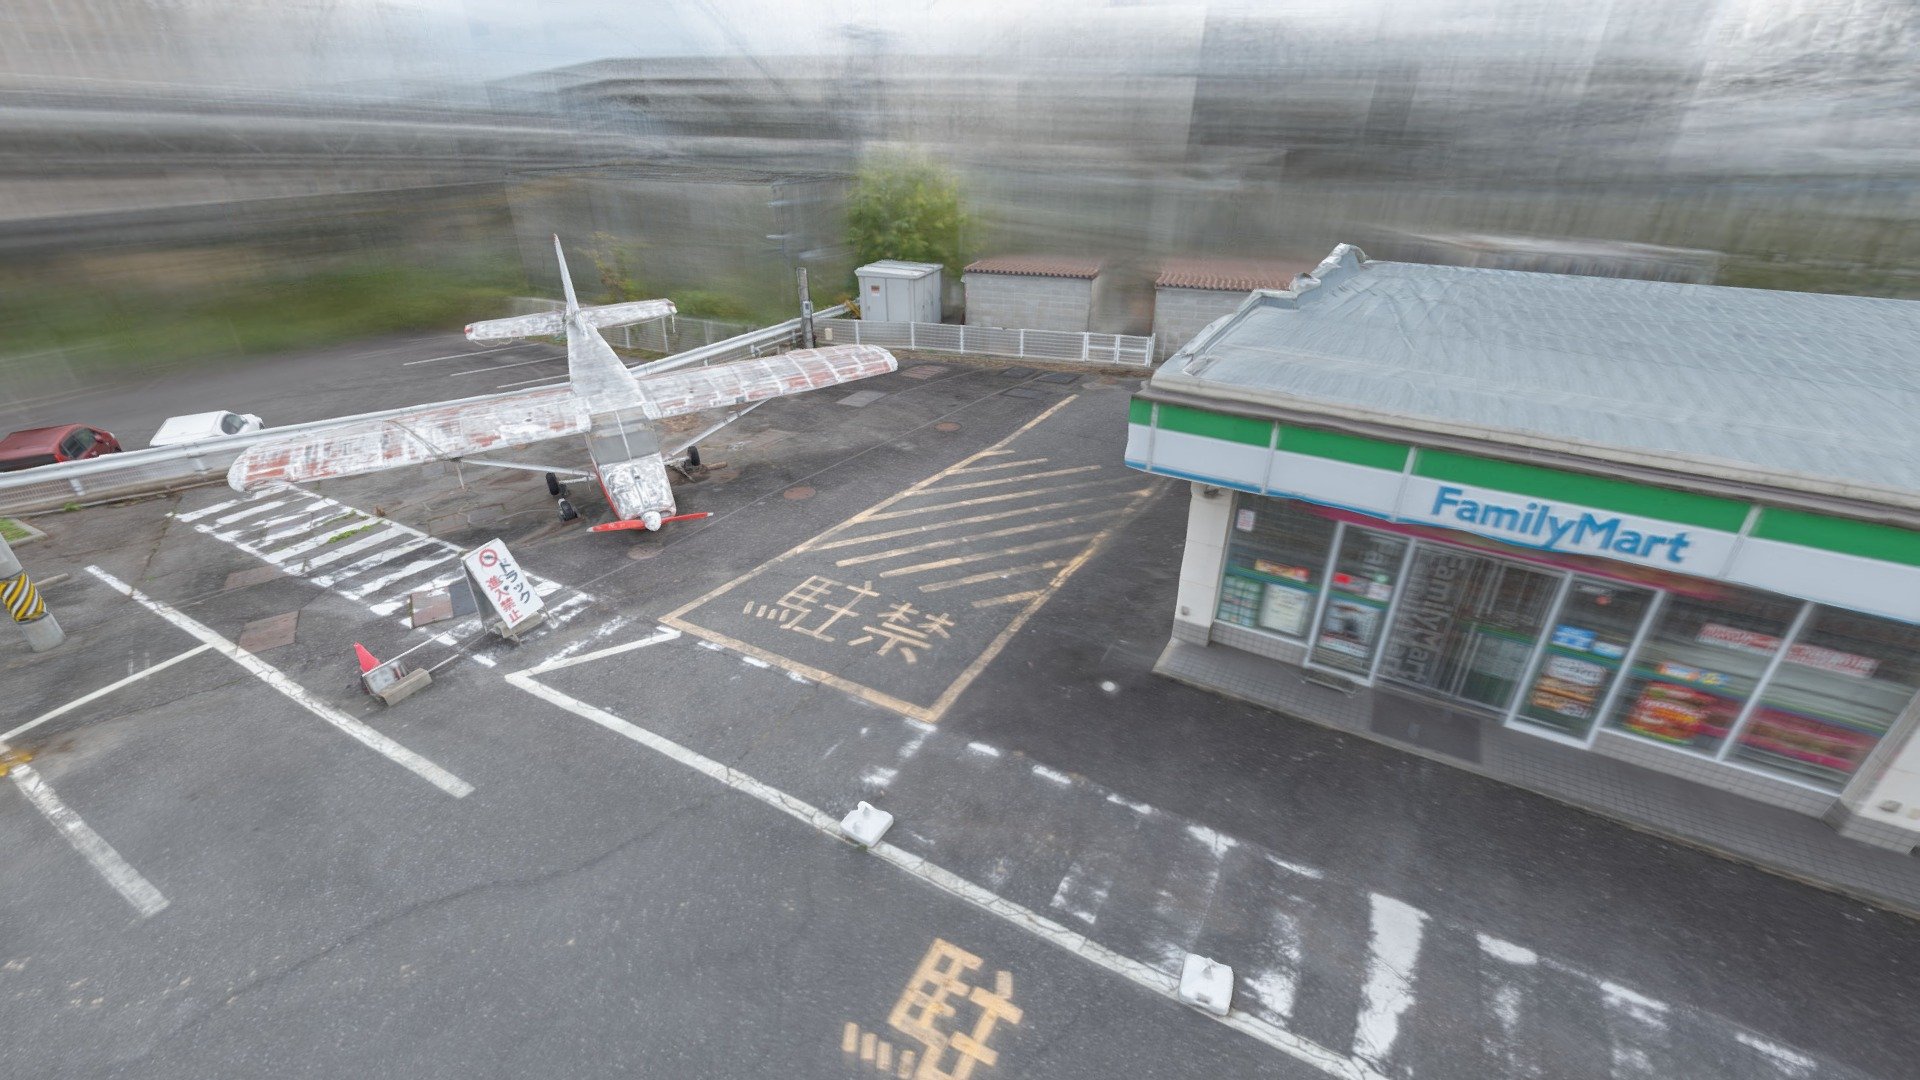 made with photogrammetry - Abandoned Plane and Convenience Store - 3D model by Tokoyoshi06 3d model